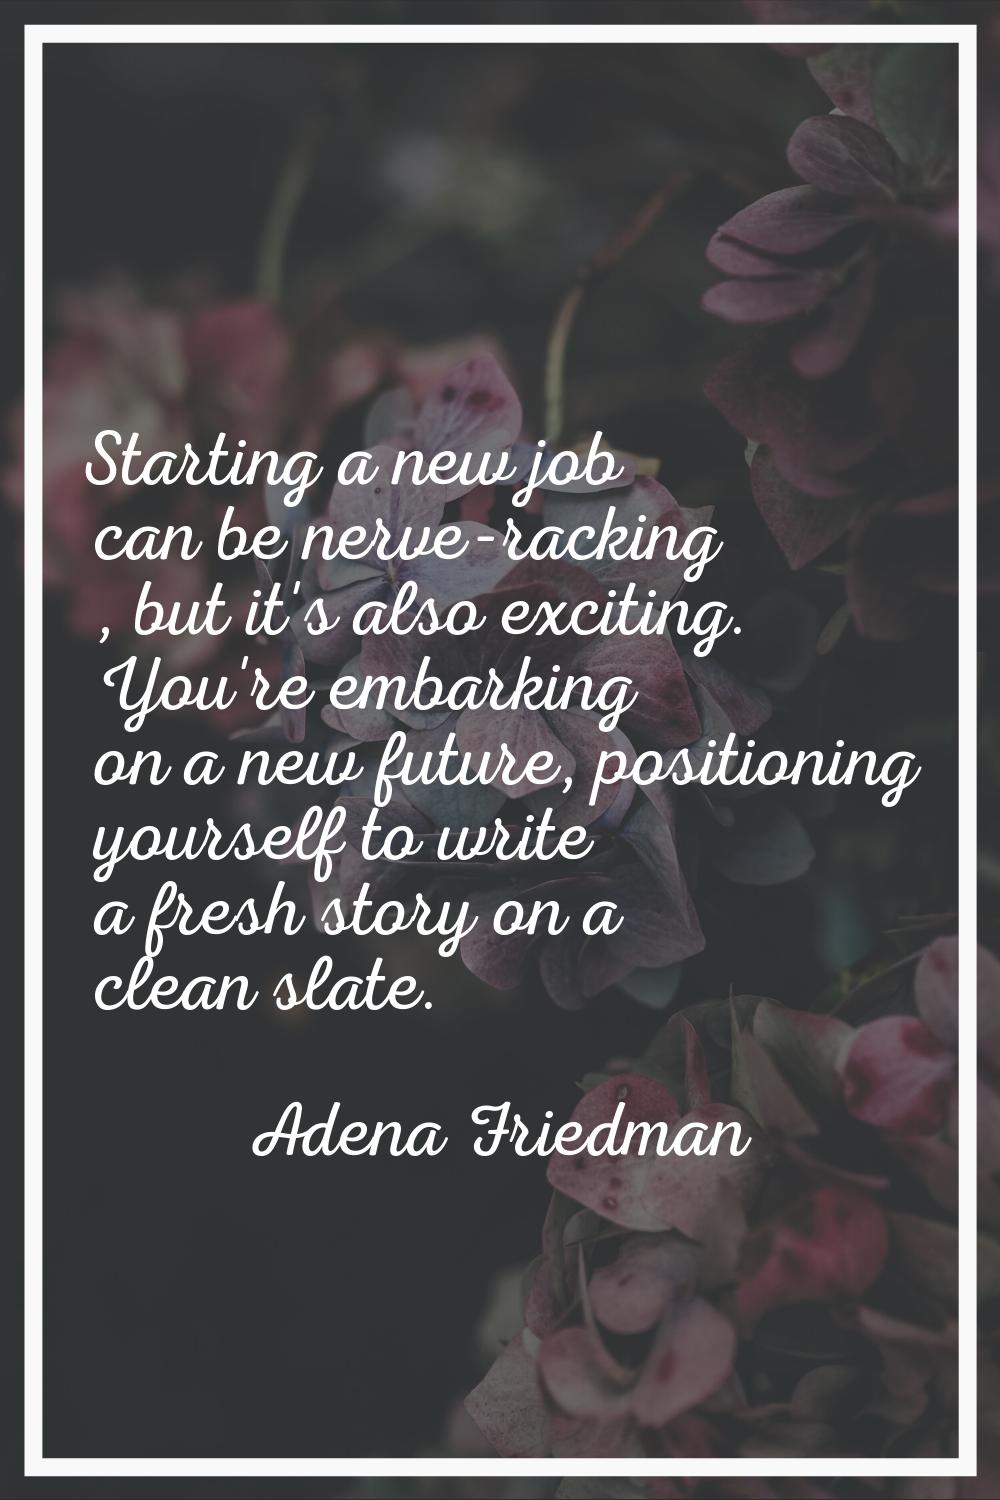 Starting a new job can be nerve-racking , but it's also exciting. You're embarking on a new future,